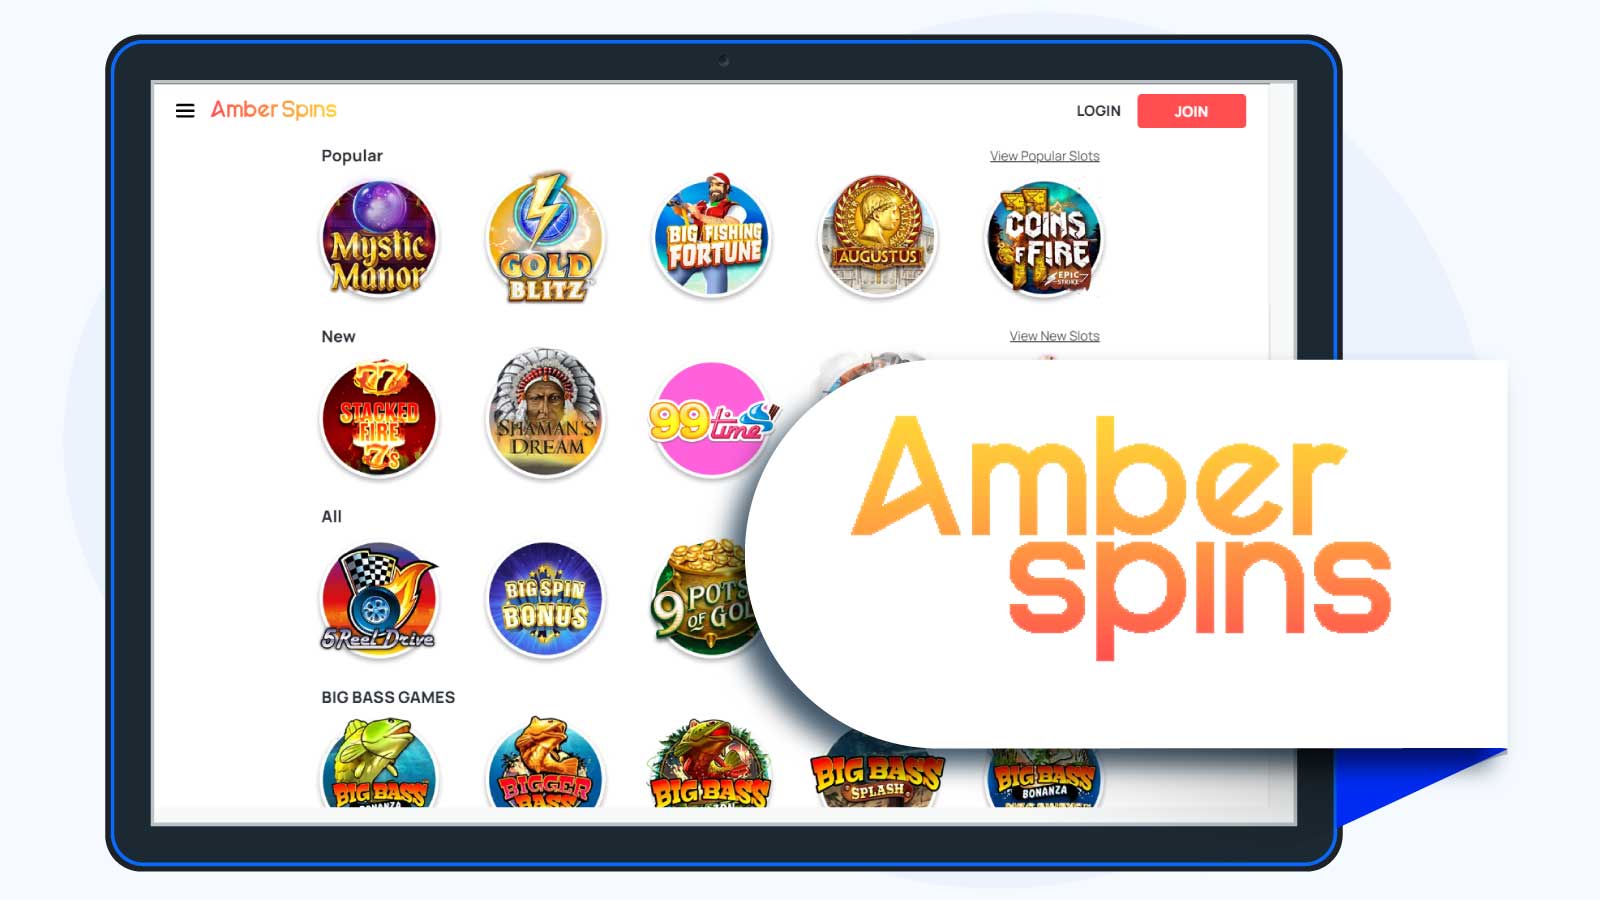 Amber Spins Casino DEPOSIT £10 PLAY WITH £30 + 50 FREE SPINS